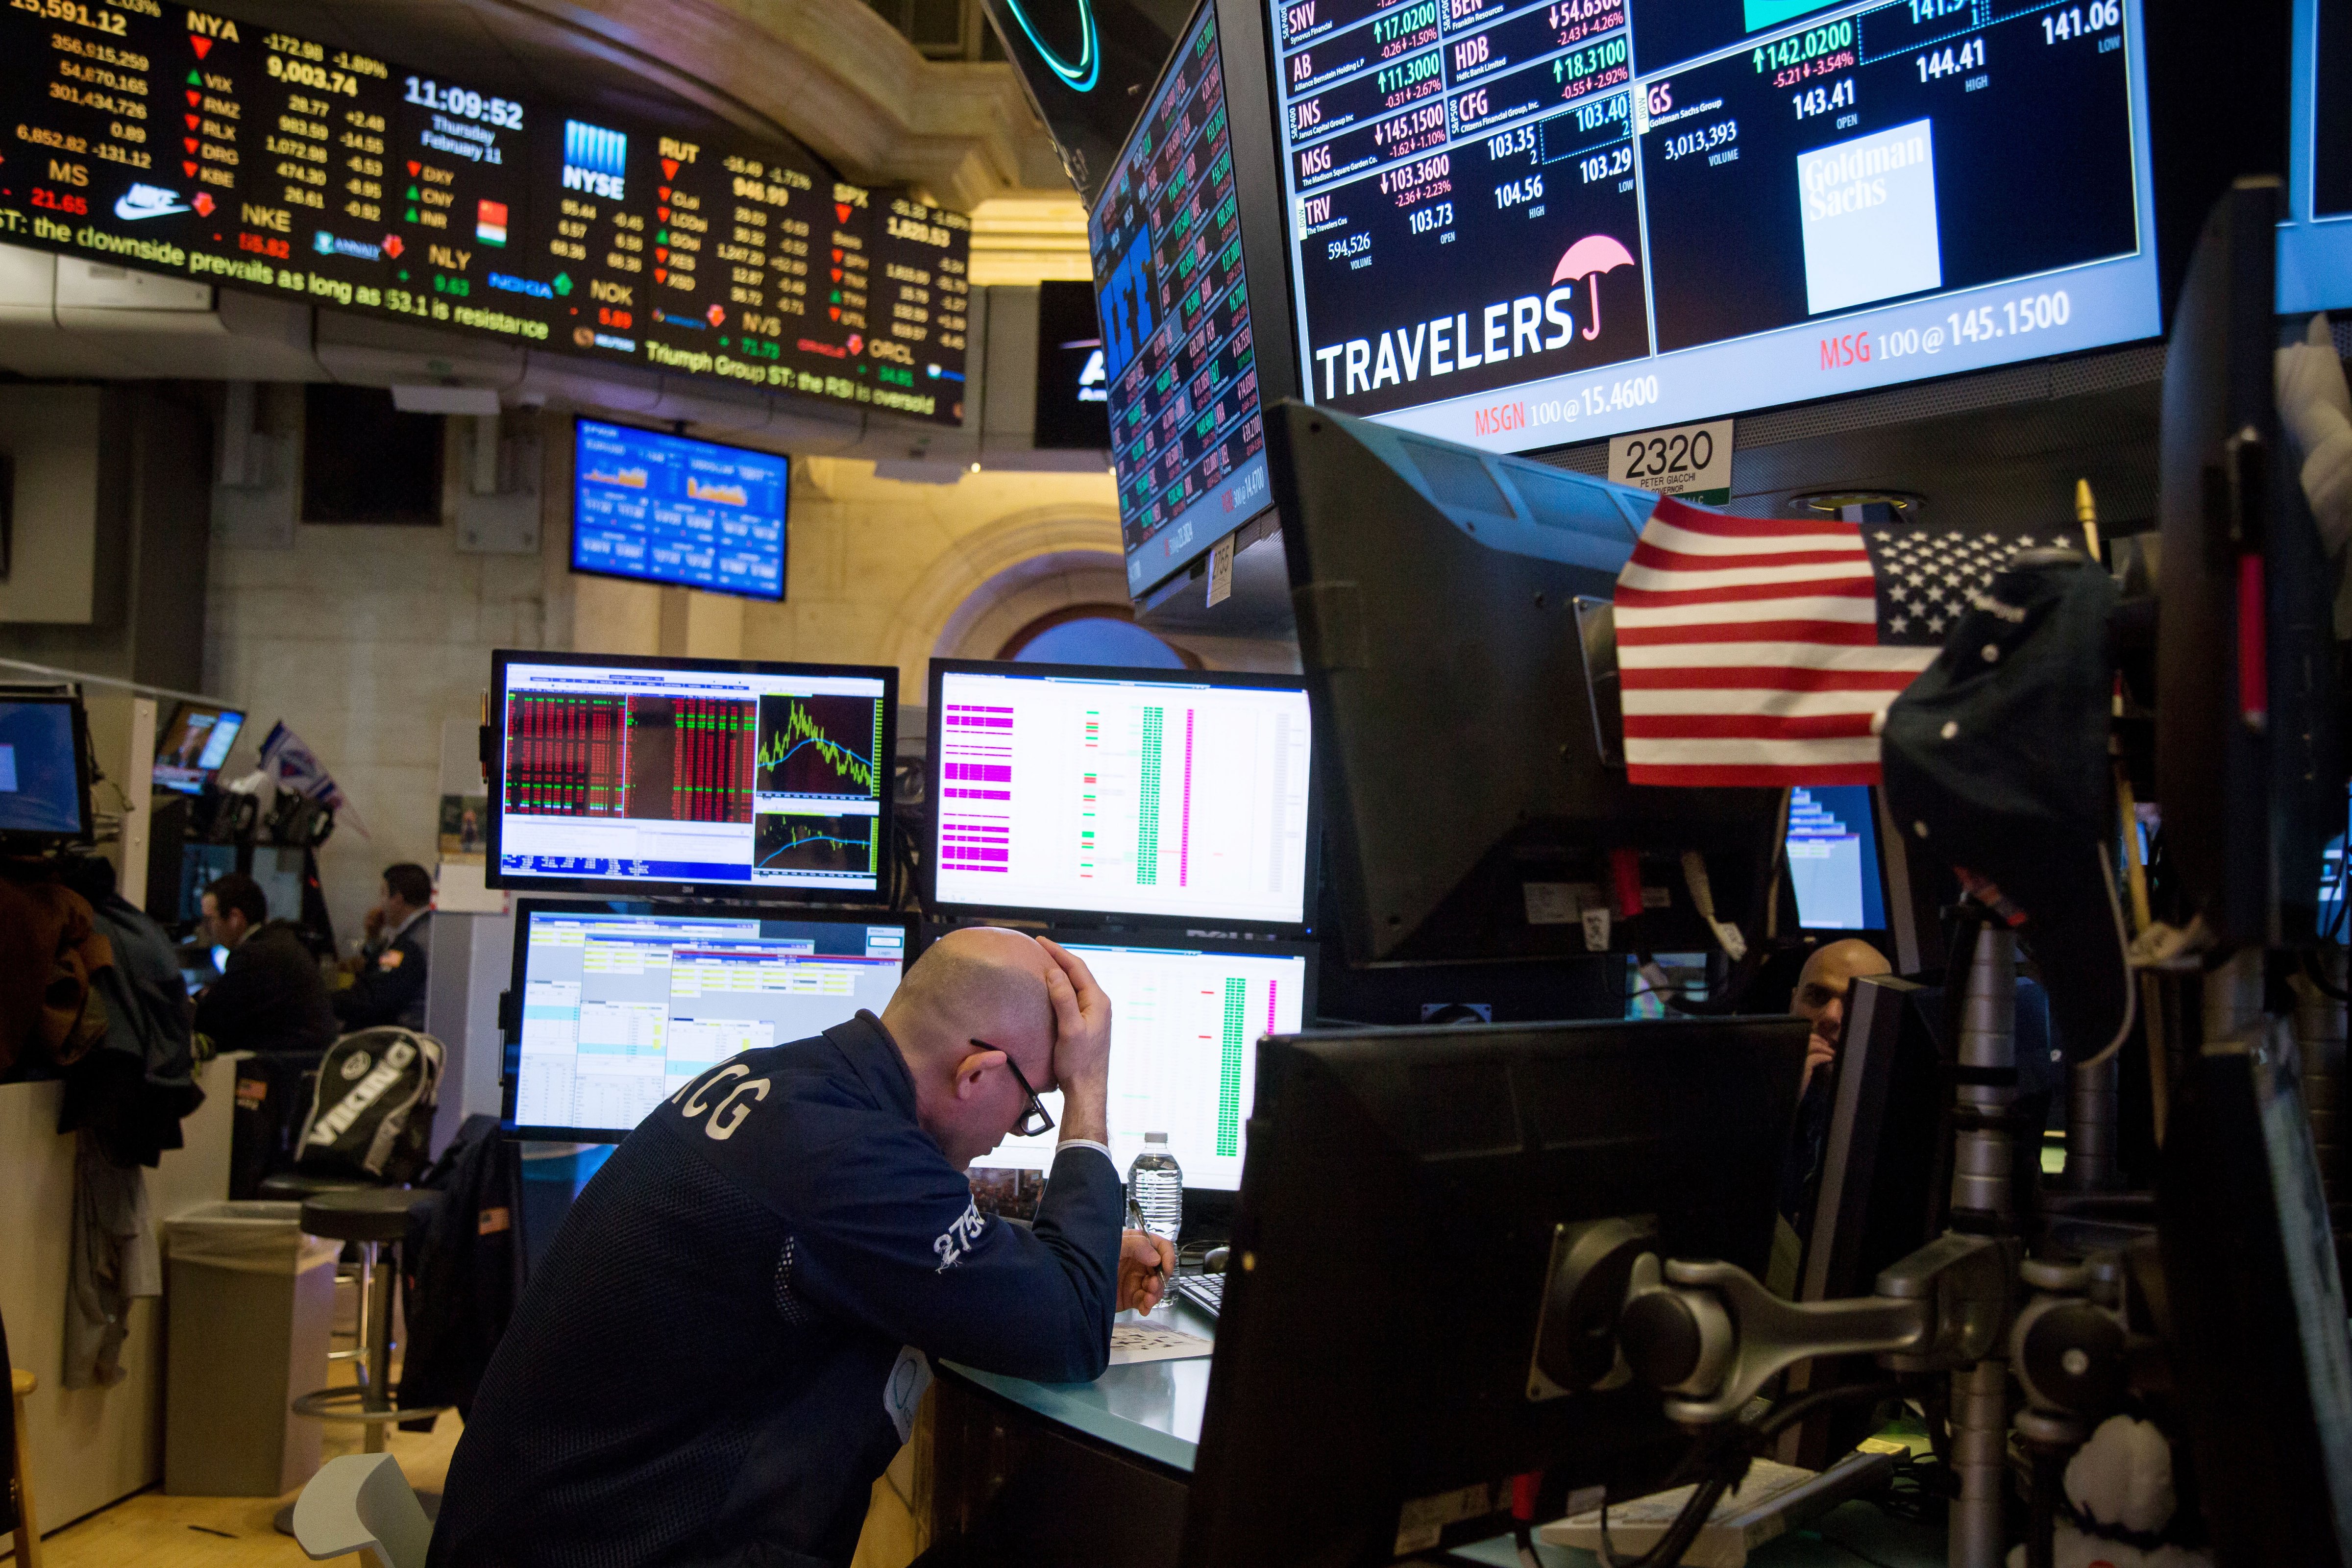 Traders work on the floor of the New York Stock Exchange in New York, on Feb. 11, 2016 (Bloomberg/Getty Images)